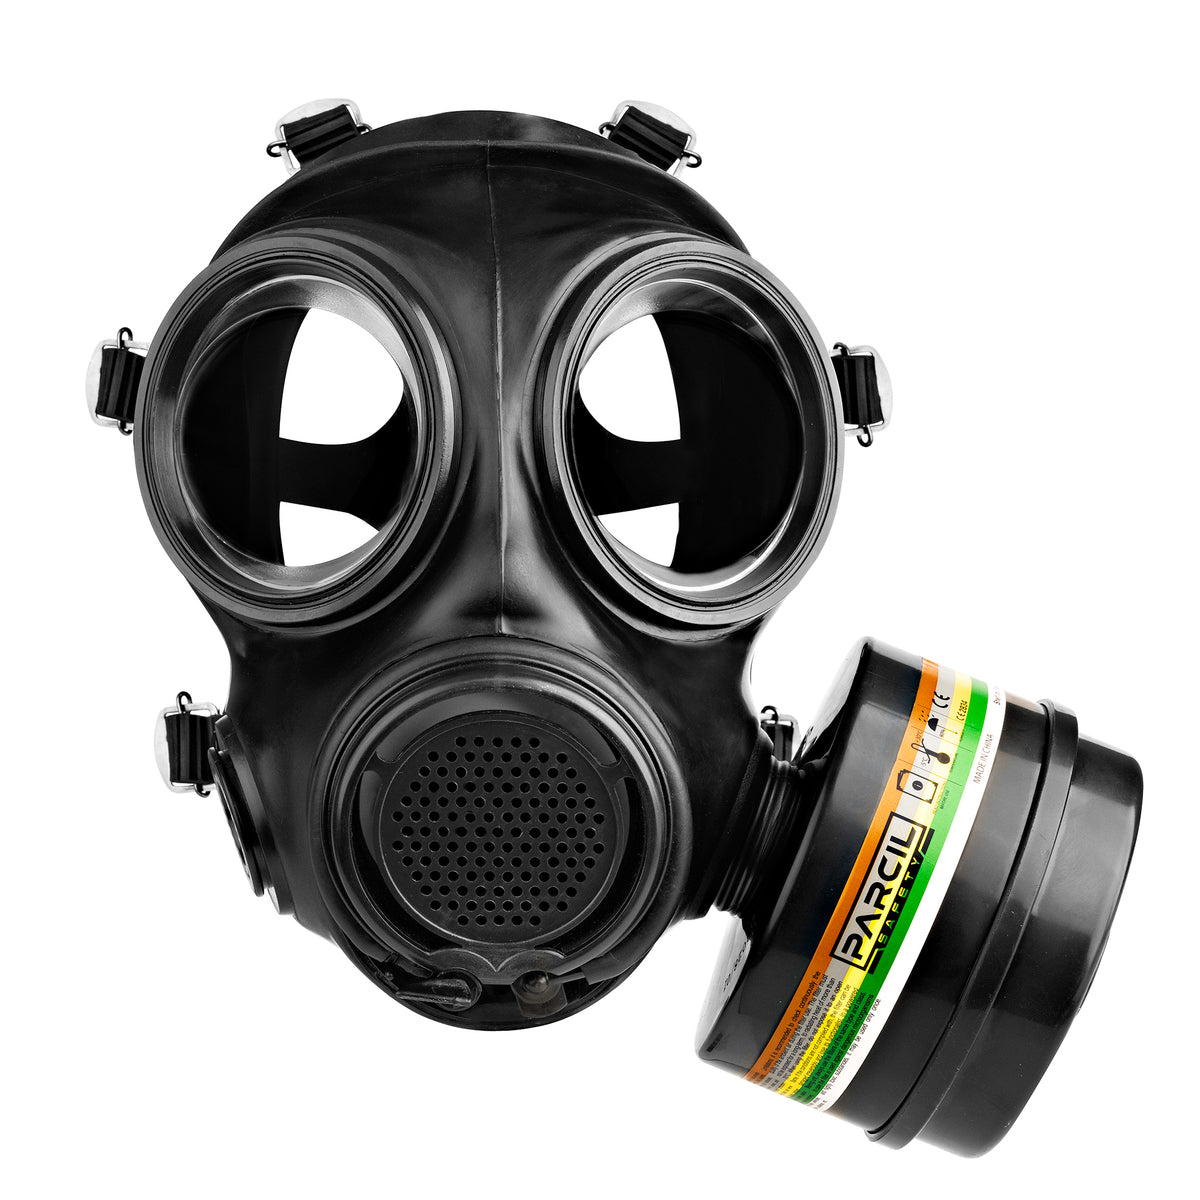 Image of A VOLUNTEER RECEIVES A NEW FILTER FOR HIS GAS MASK